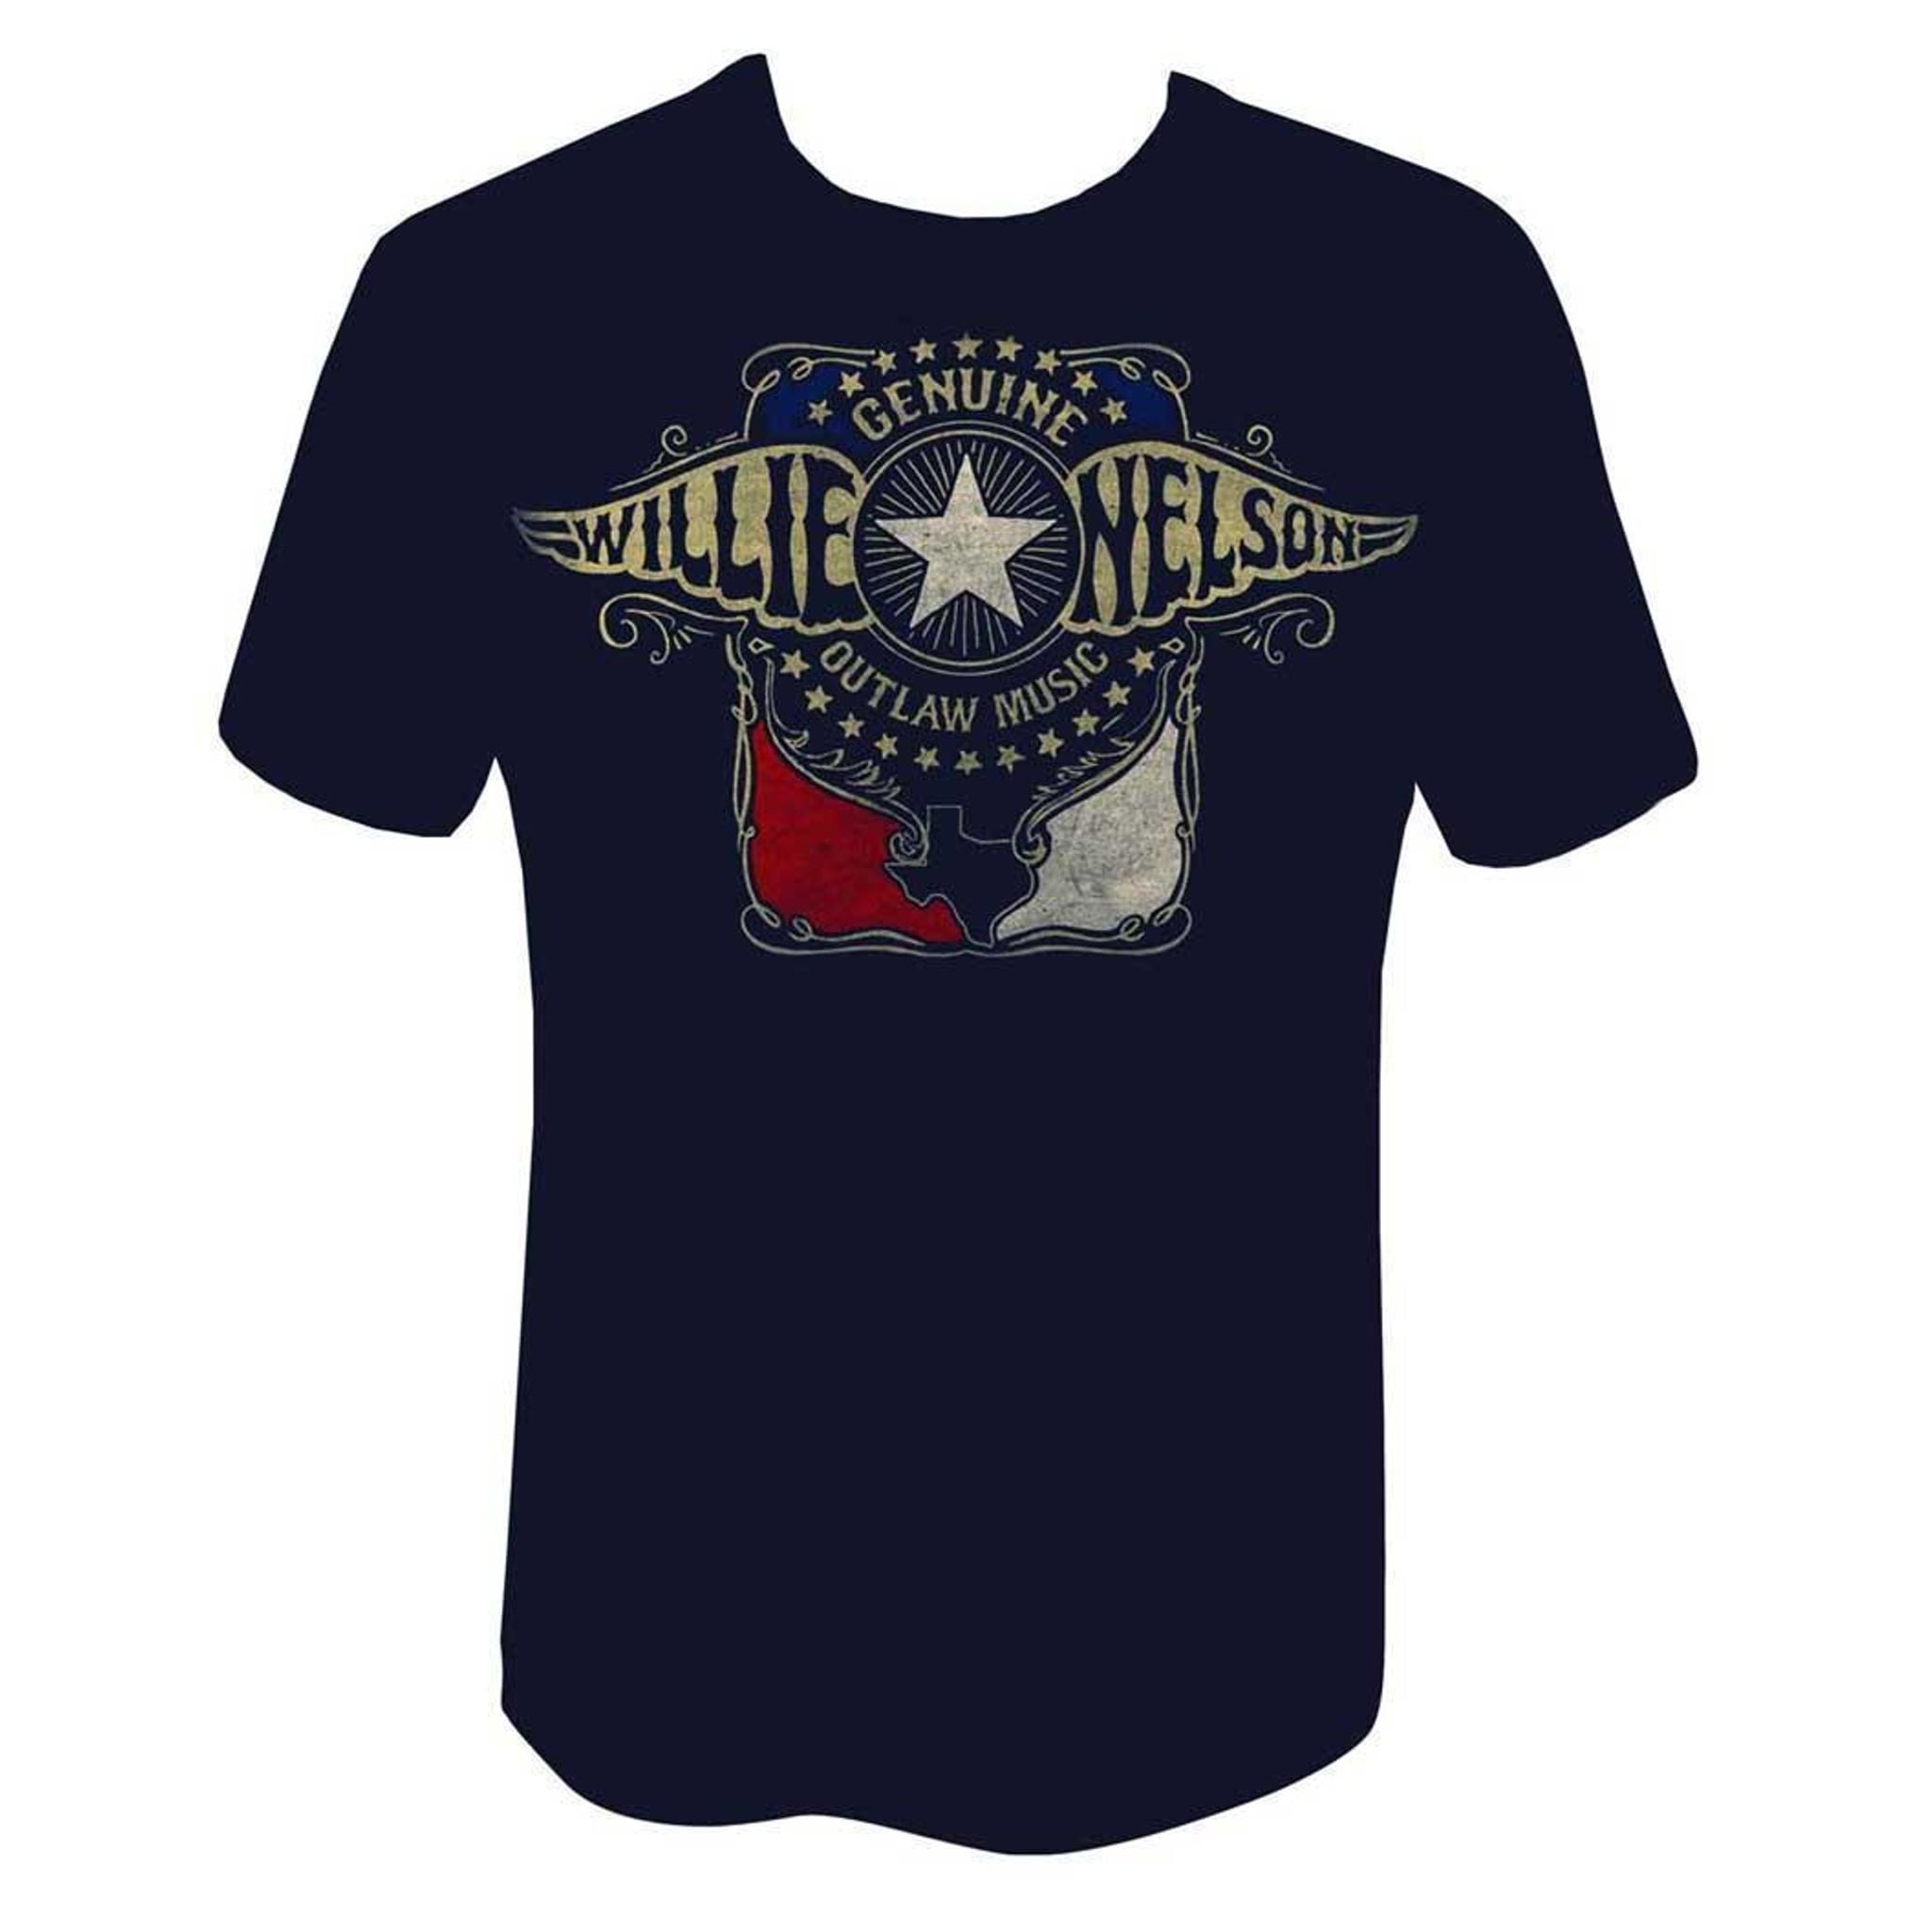 Willie Nelson Outlaw Wings T-Shirt - Walmart.com